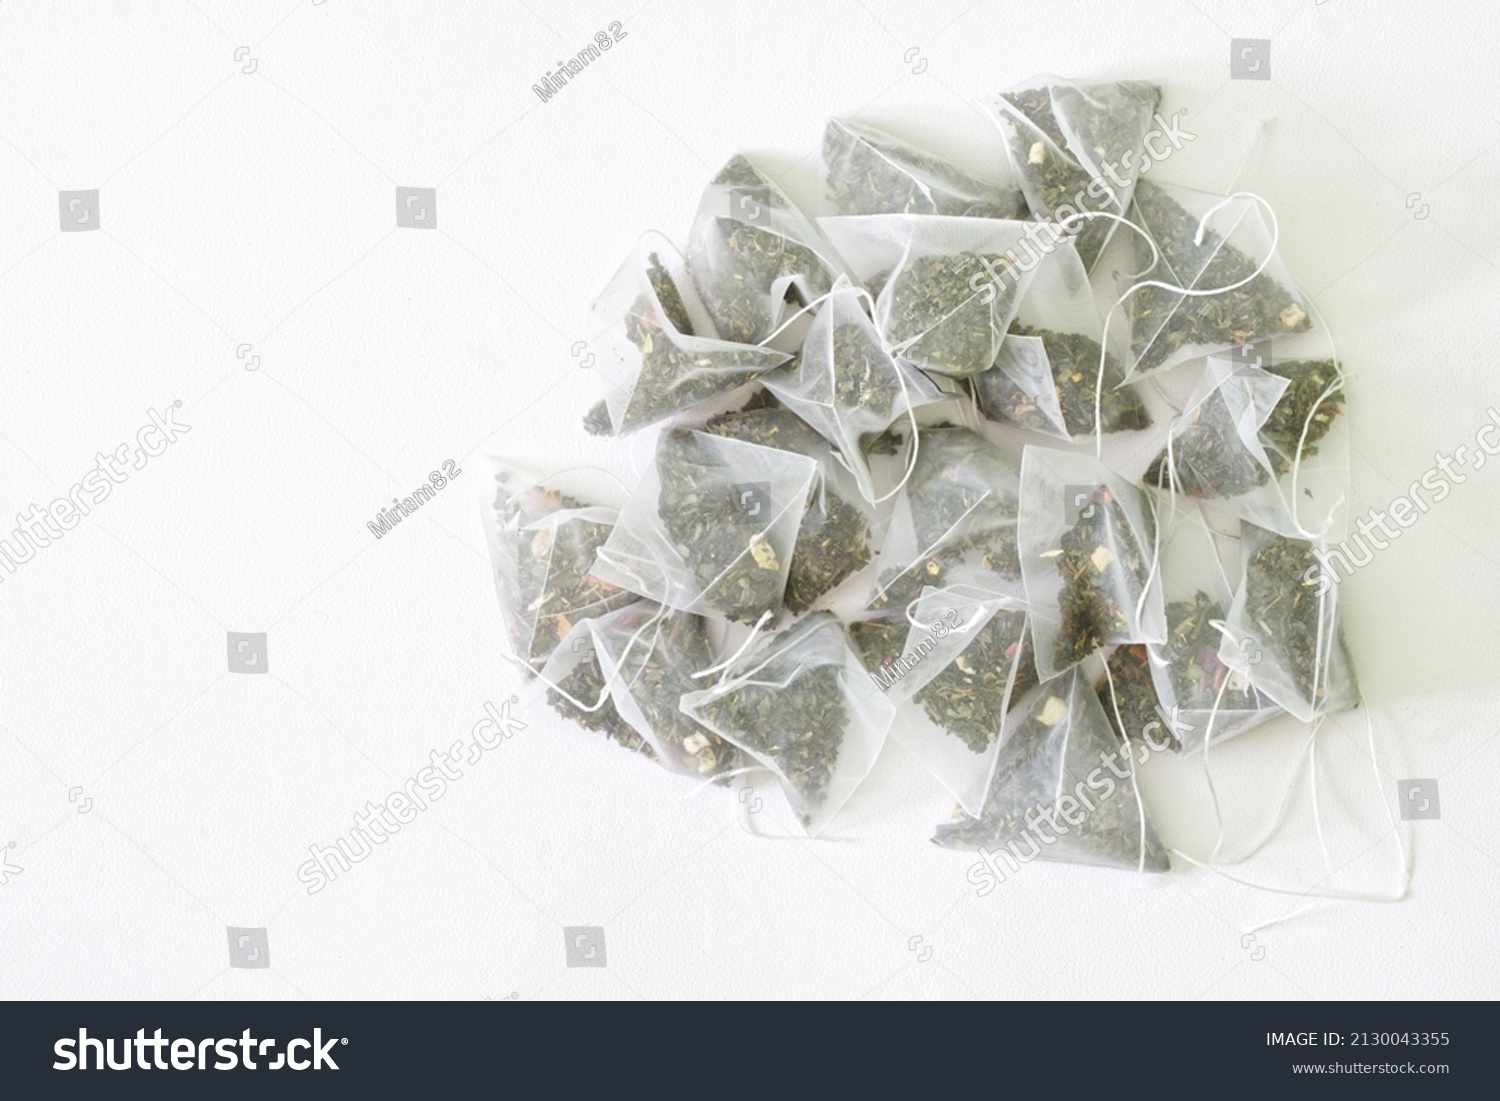 Bunch of tea bags-pyramids with green tea with the addition of fragrant fruits. Textured white background. Copy space for an inscription. Daylight #2130043355